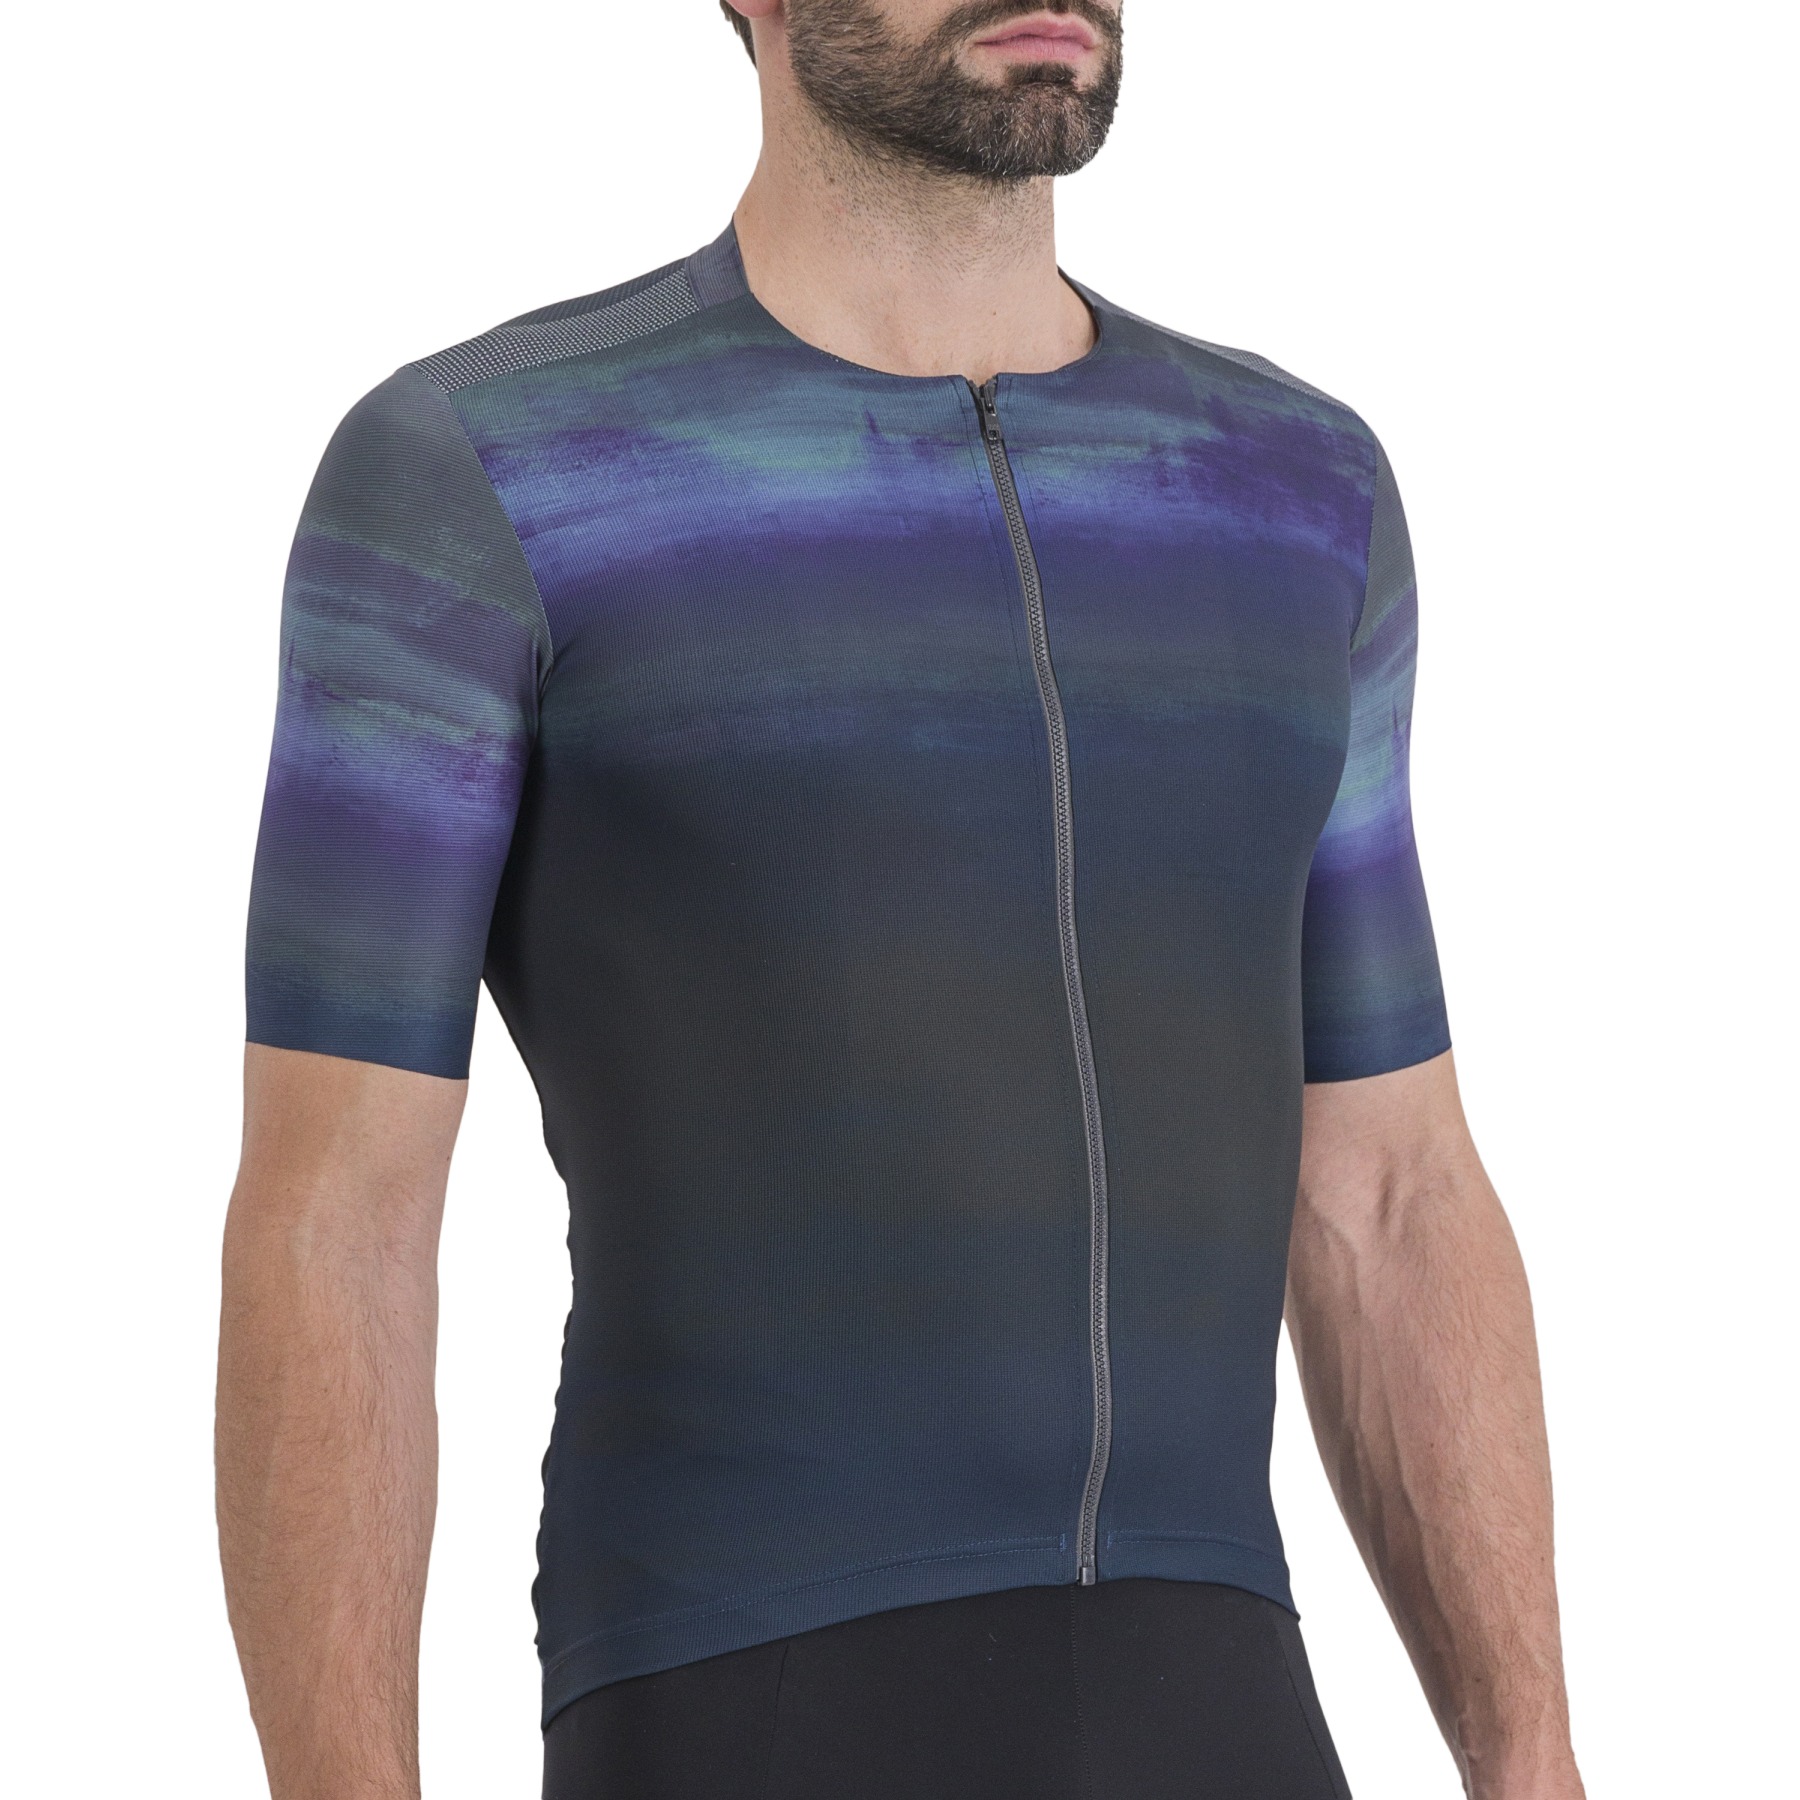 Picture of Sportful Flow Supergiara Jersey - 456 Galaxy Blue Black